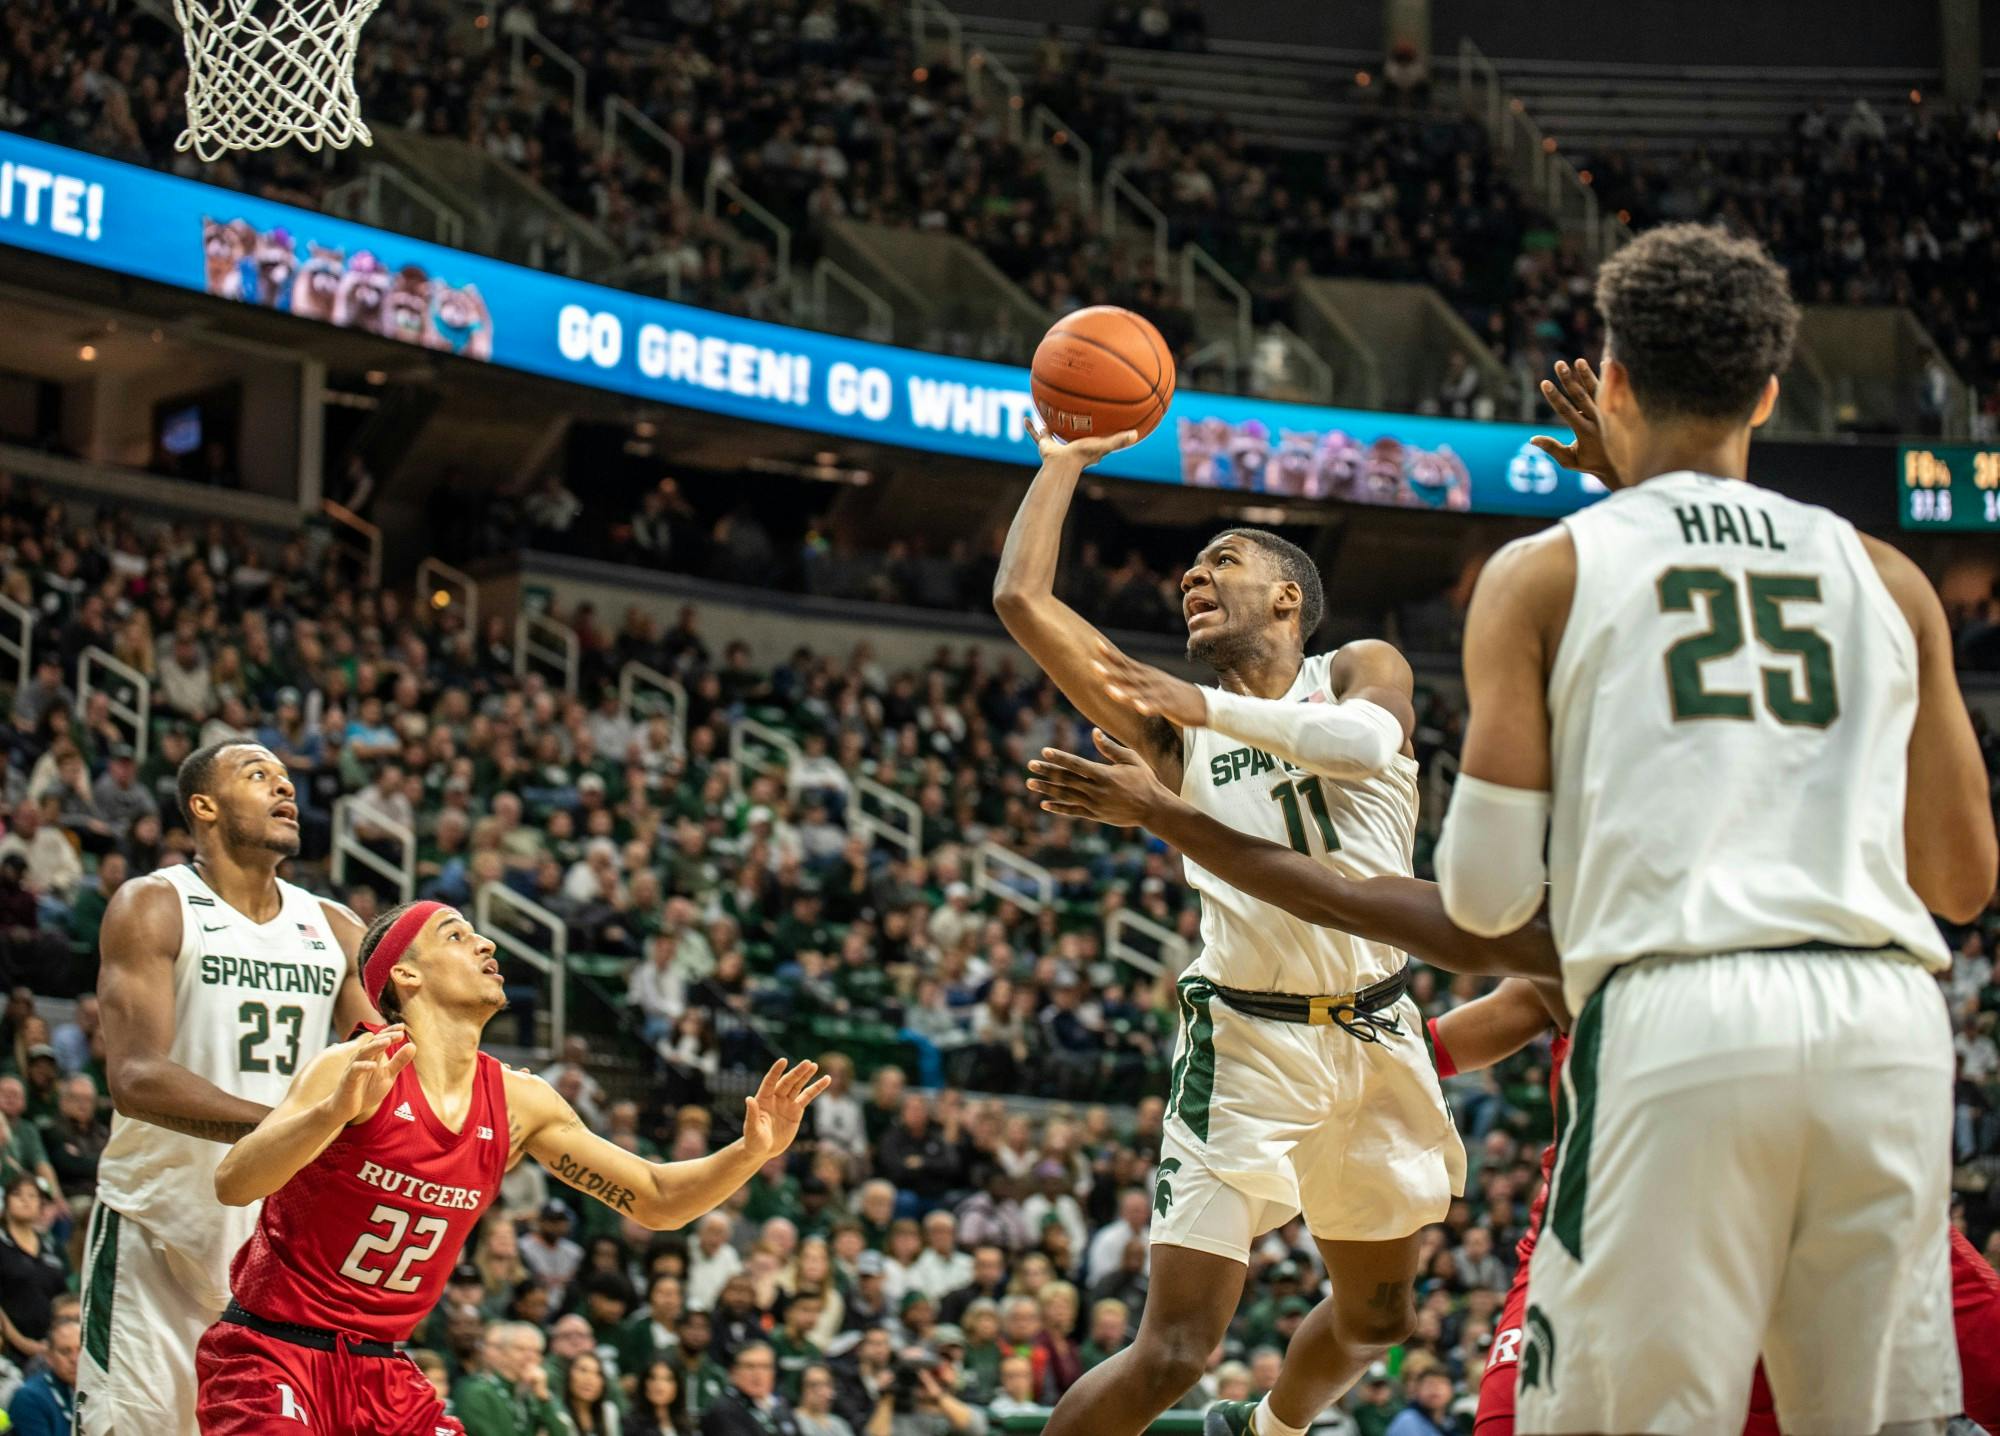 <p>Then-sophomore forward Aaron Henry (11) shoots the ball during the game against Rutgers at Breslin Center on Dec. 8, 2019. The Spartans lead the Scarlet Knights at halftime, 33-28.</p>